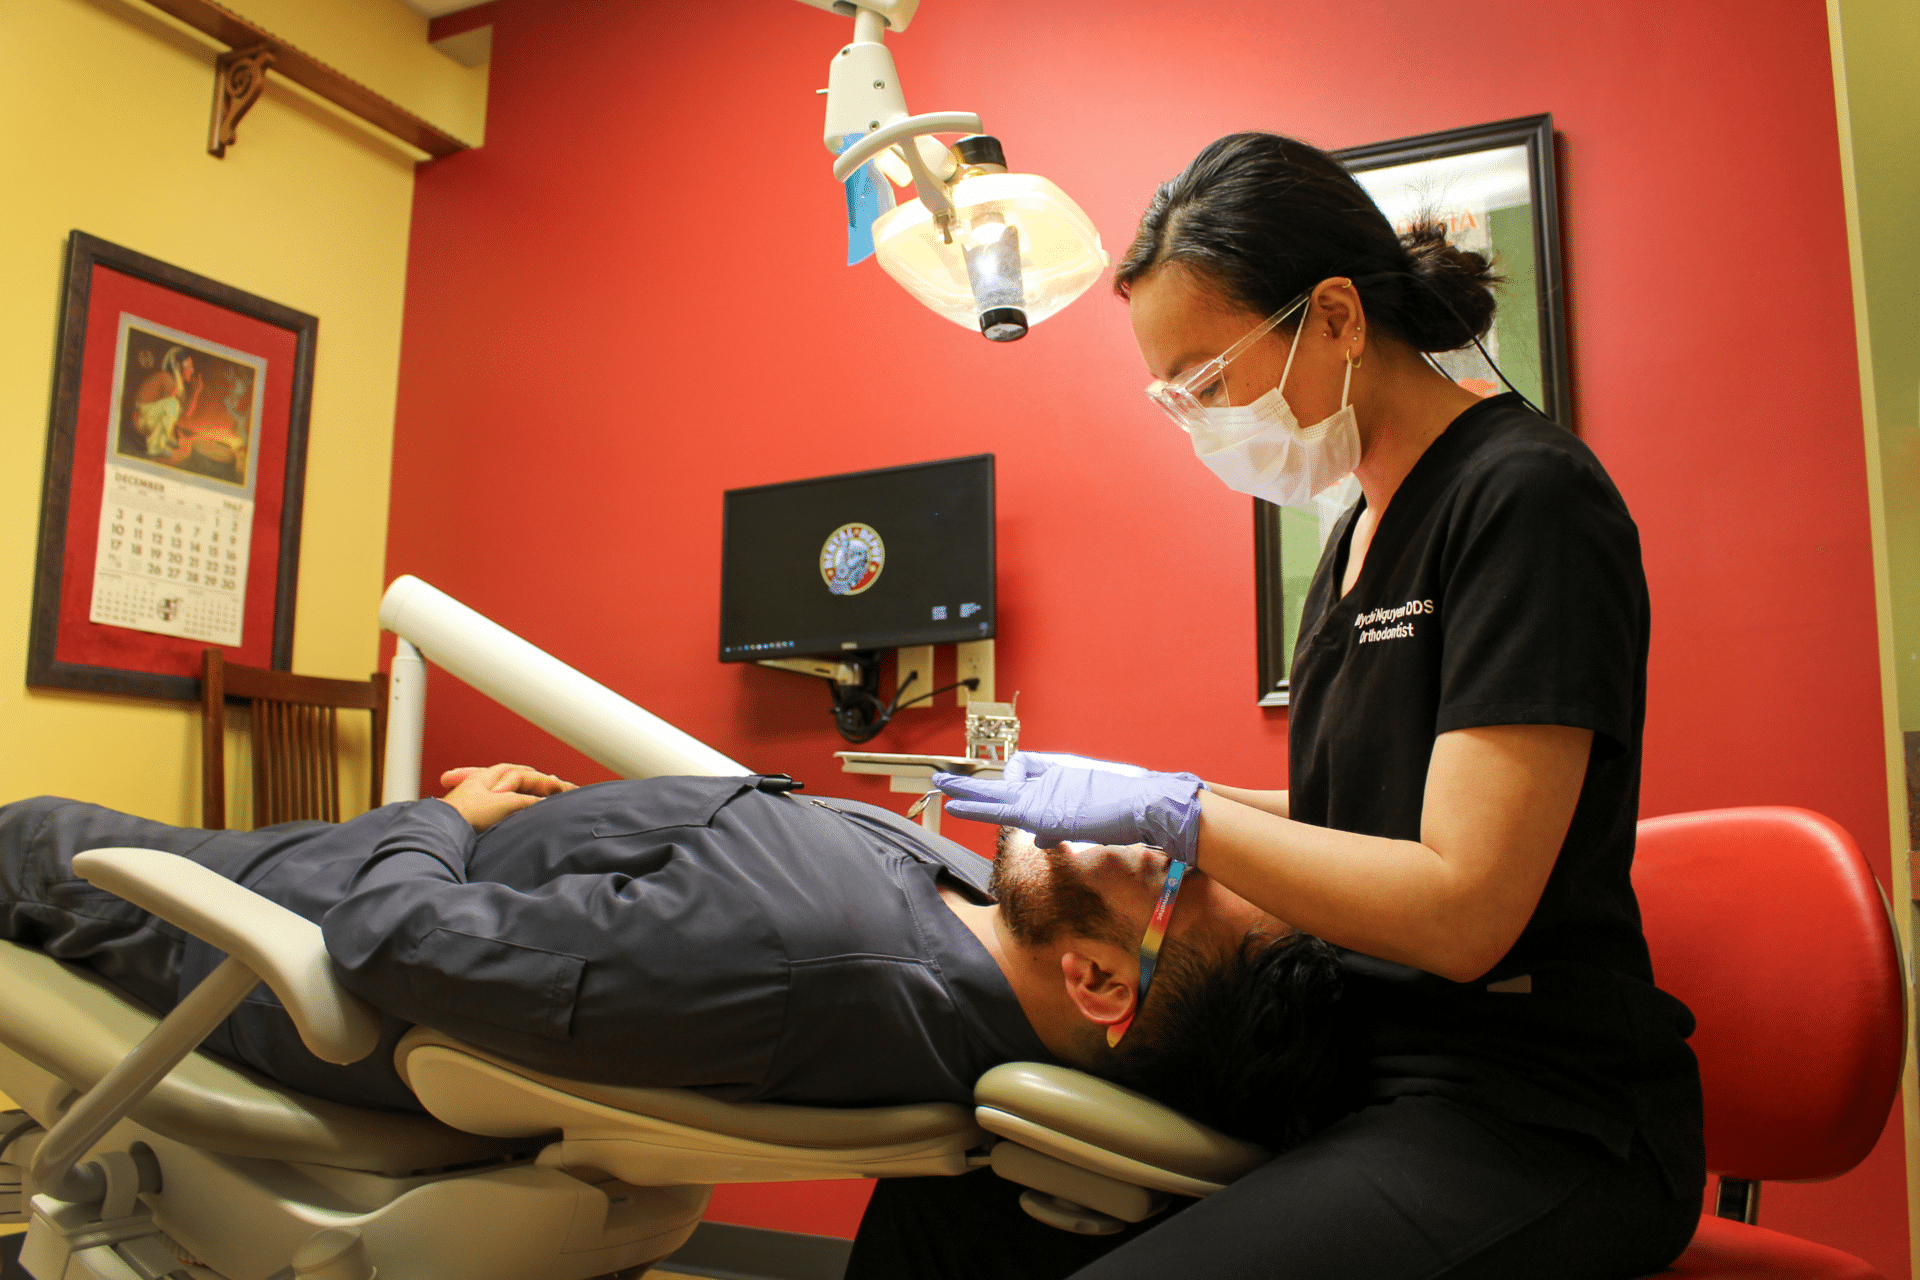 Dentist is working on a dental patient while they lay in the dental chair.